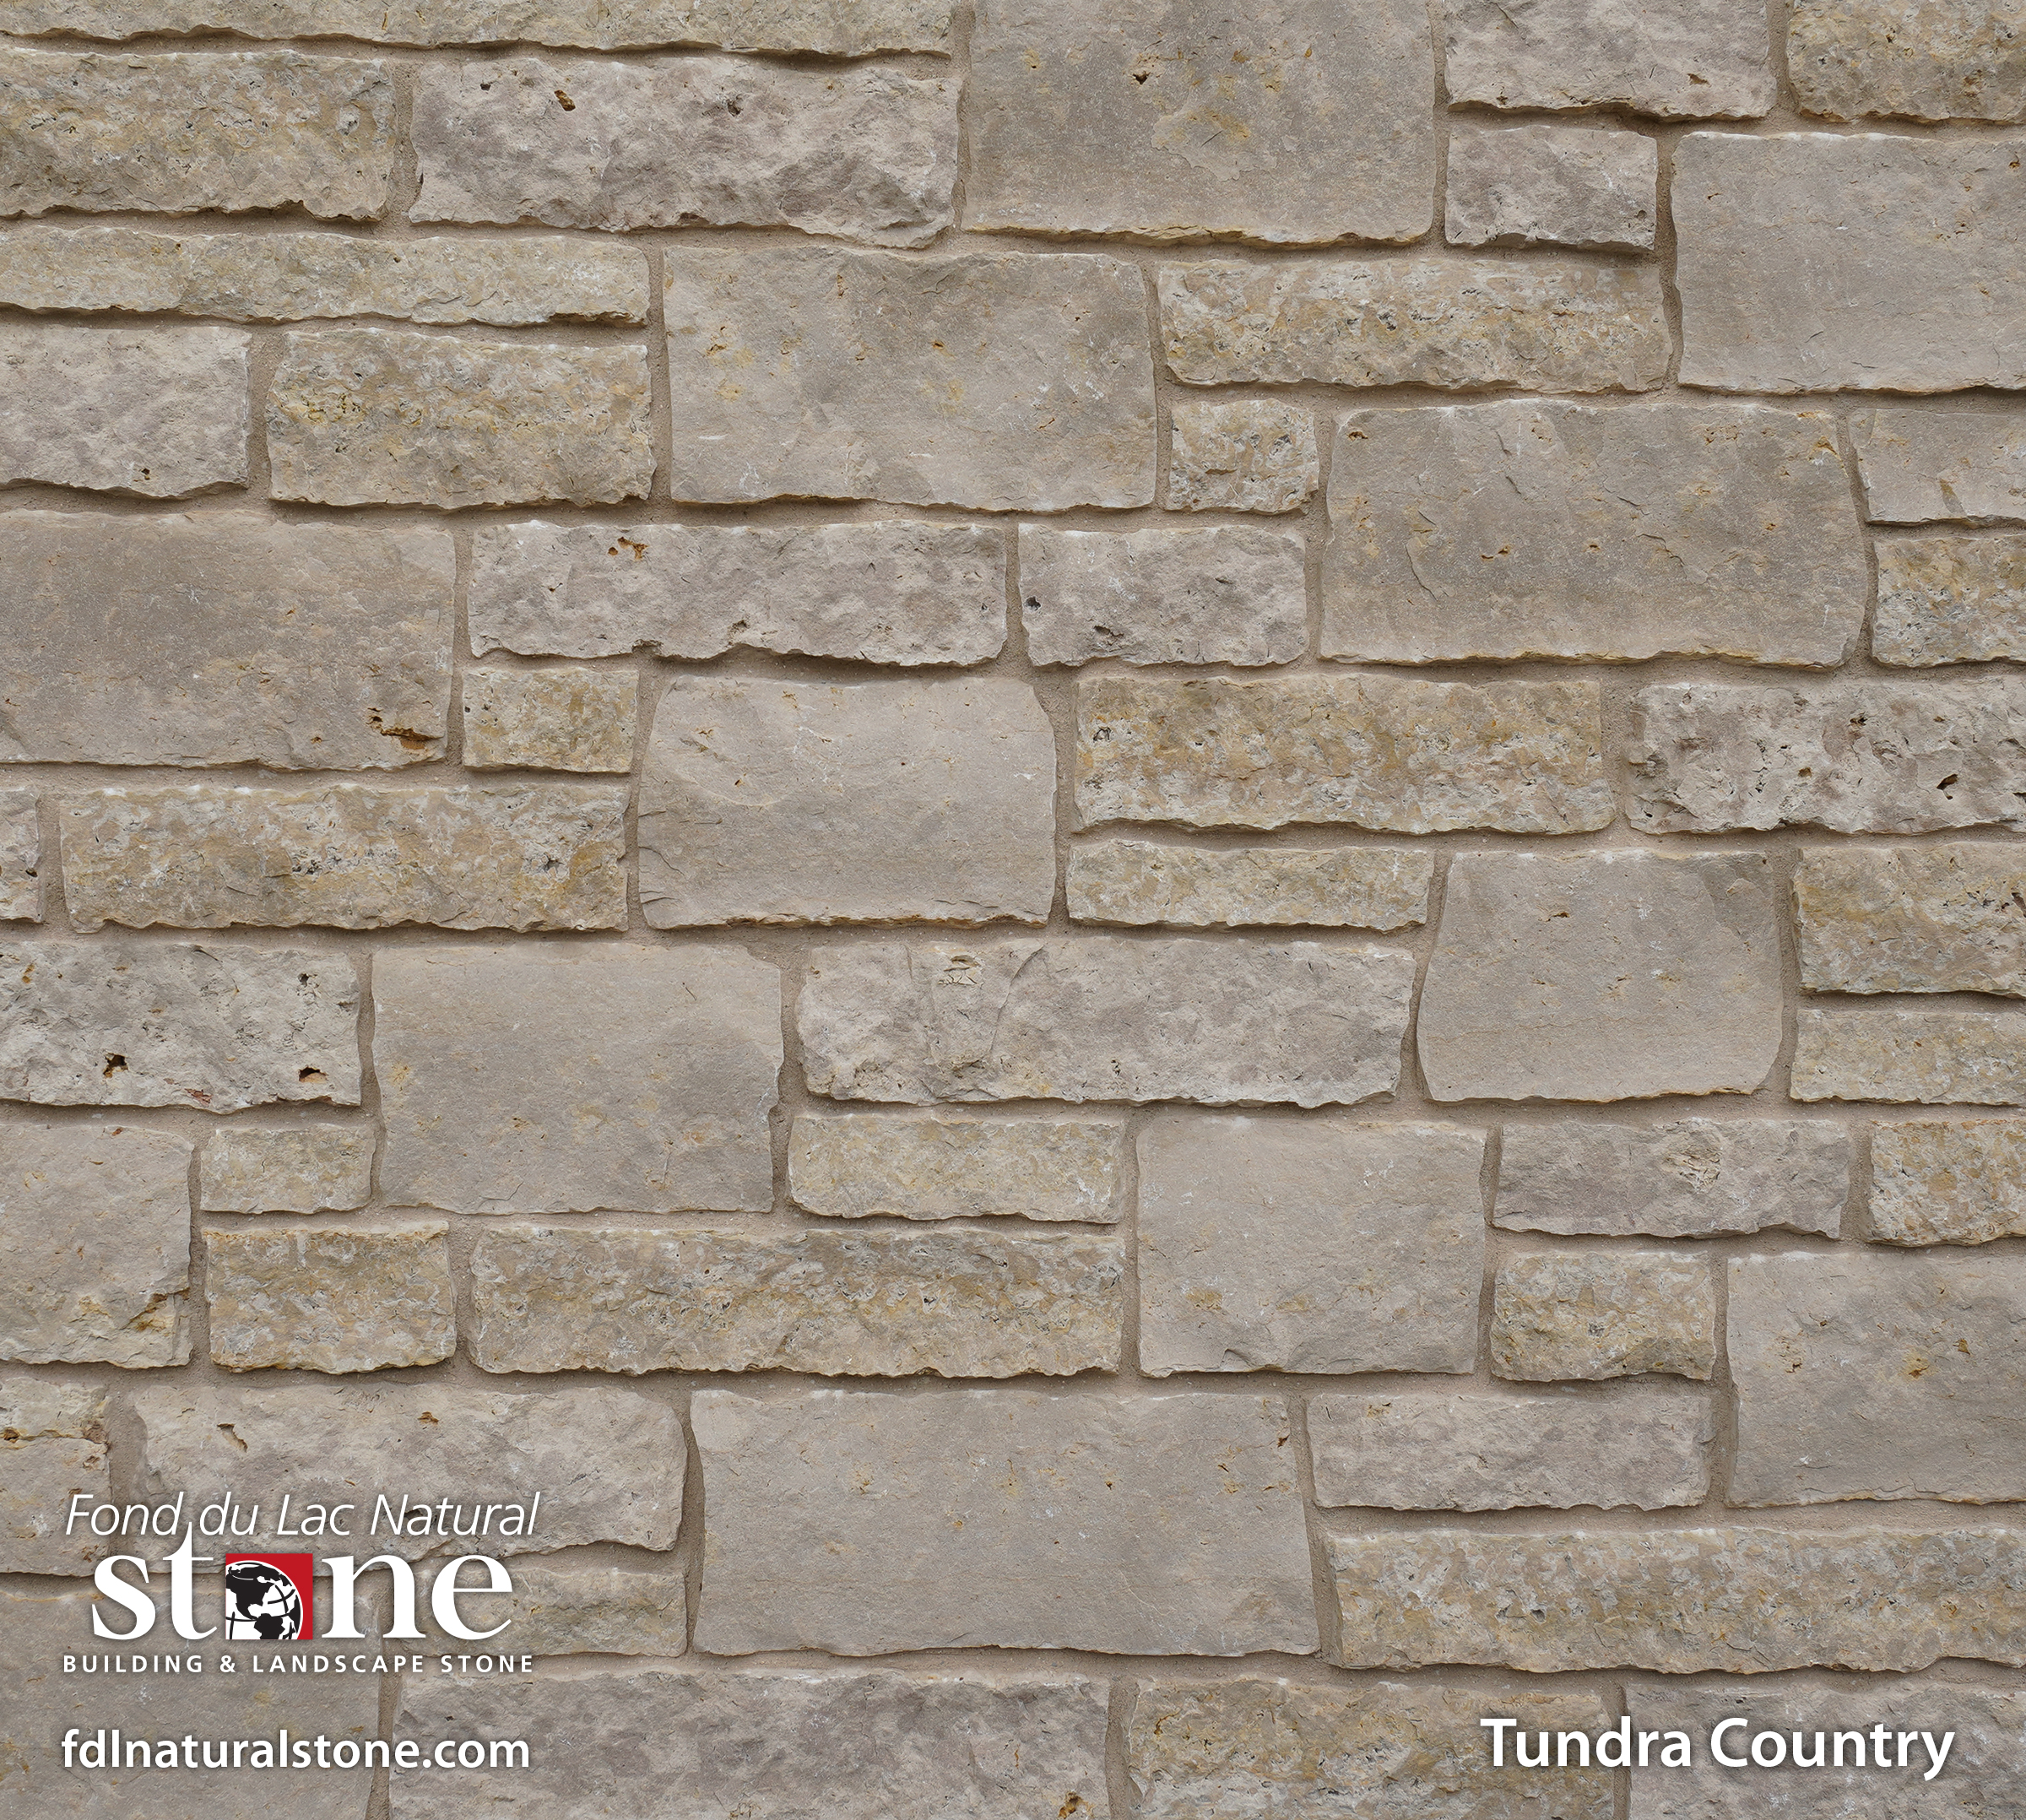 Tundra Country™ - Fond du Lac Natural Stone